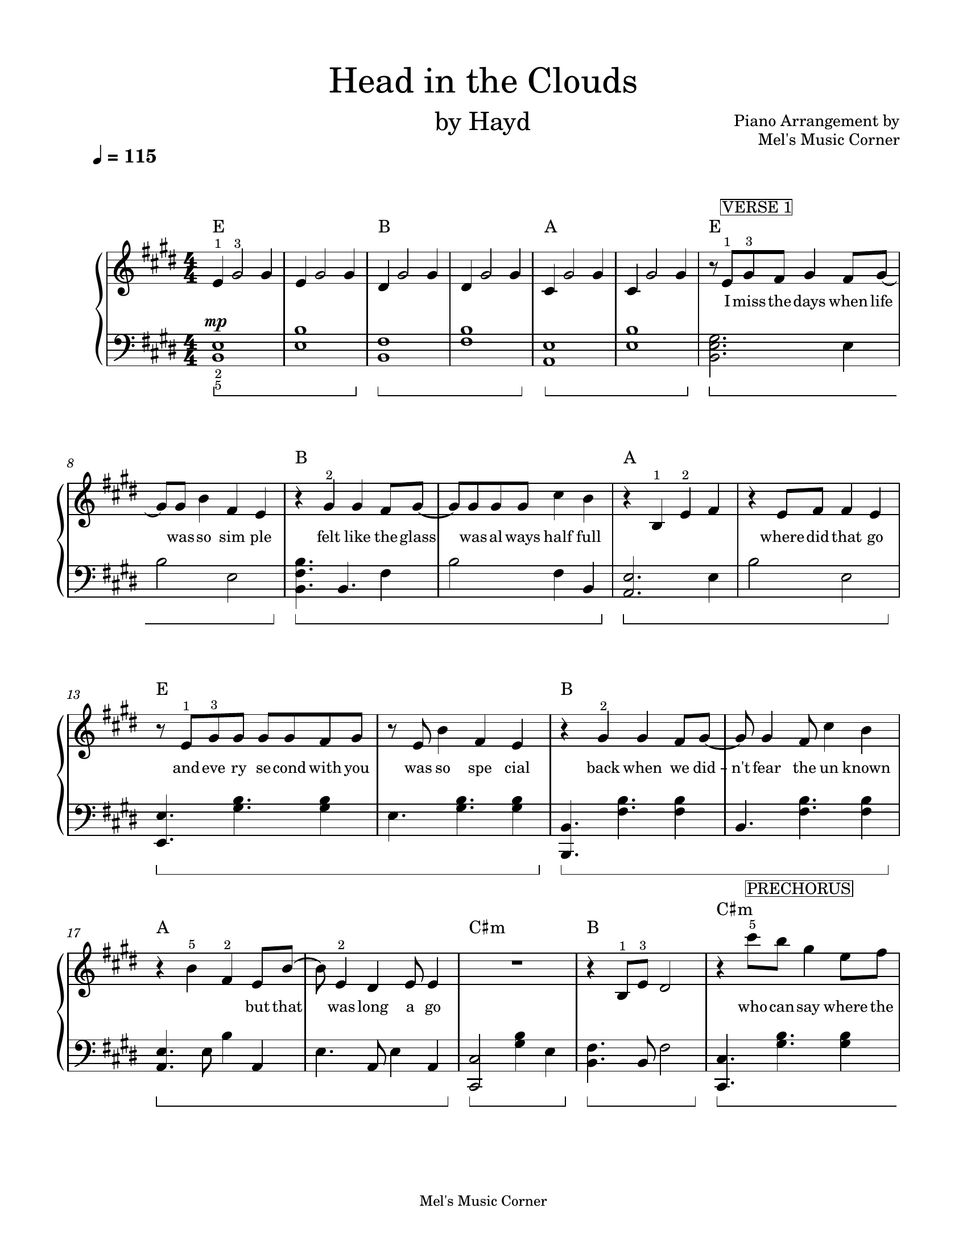 Hayd - Head in the Clouds (piano sheet music) by Mel's Music Corner